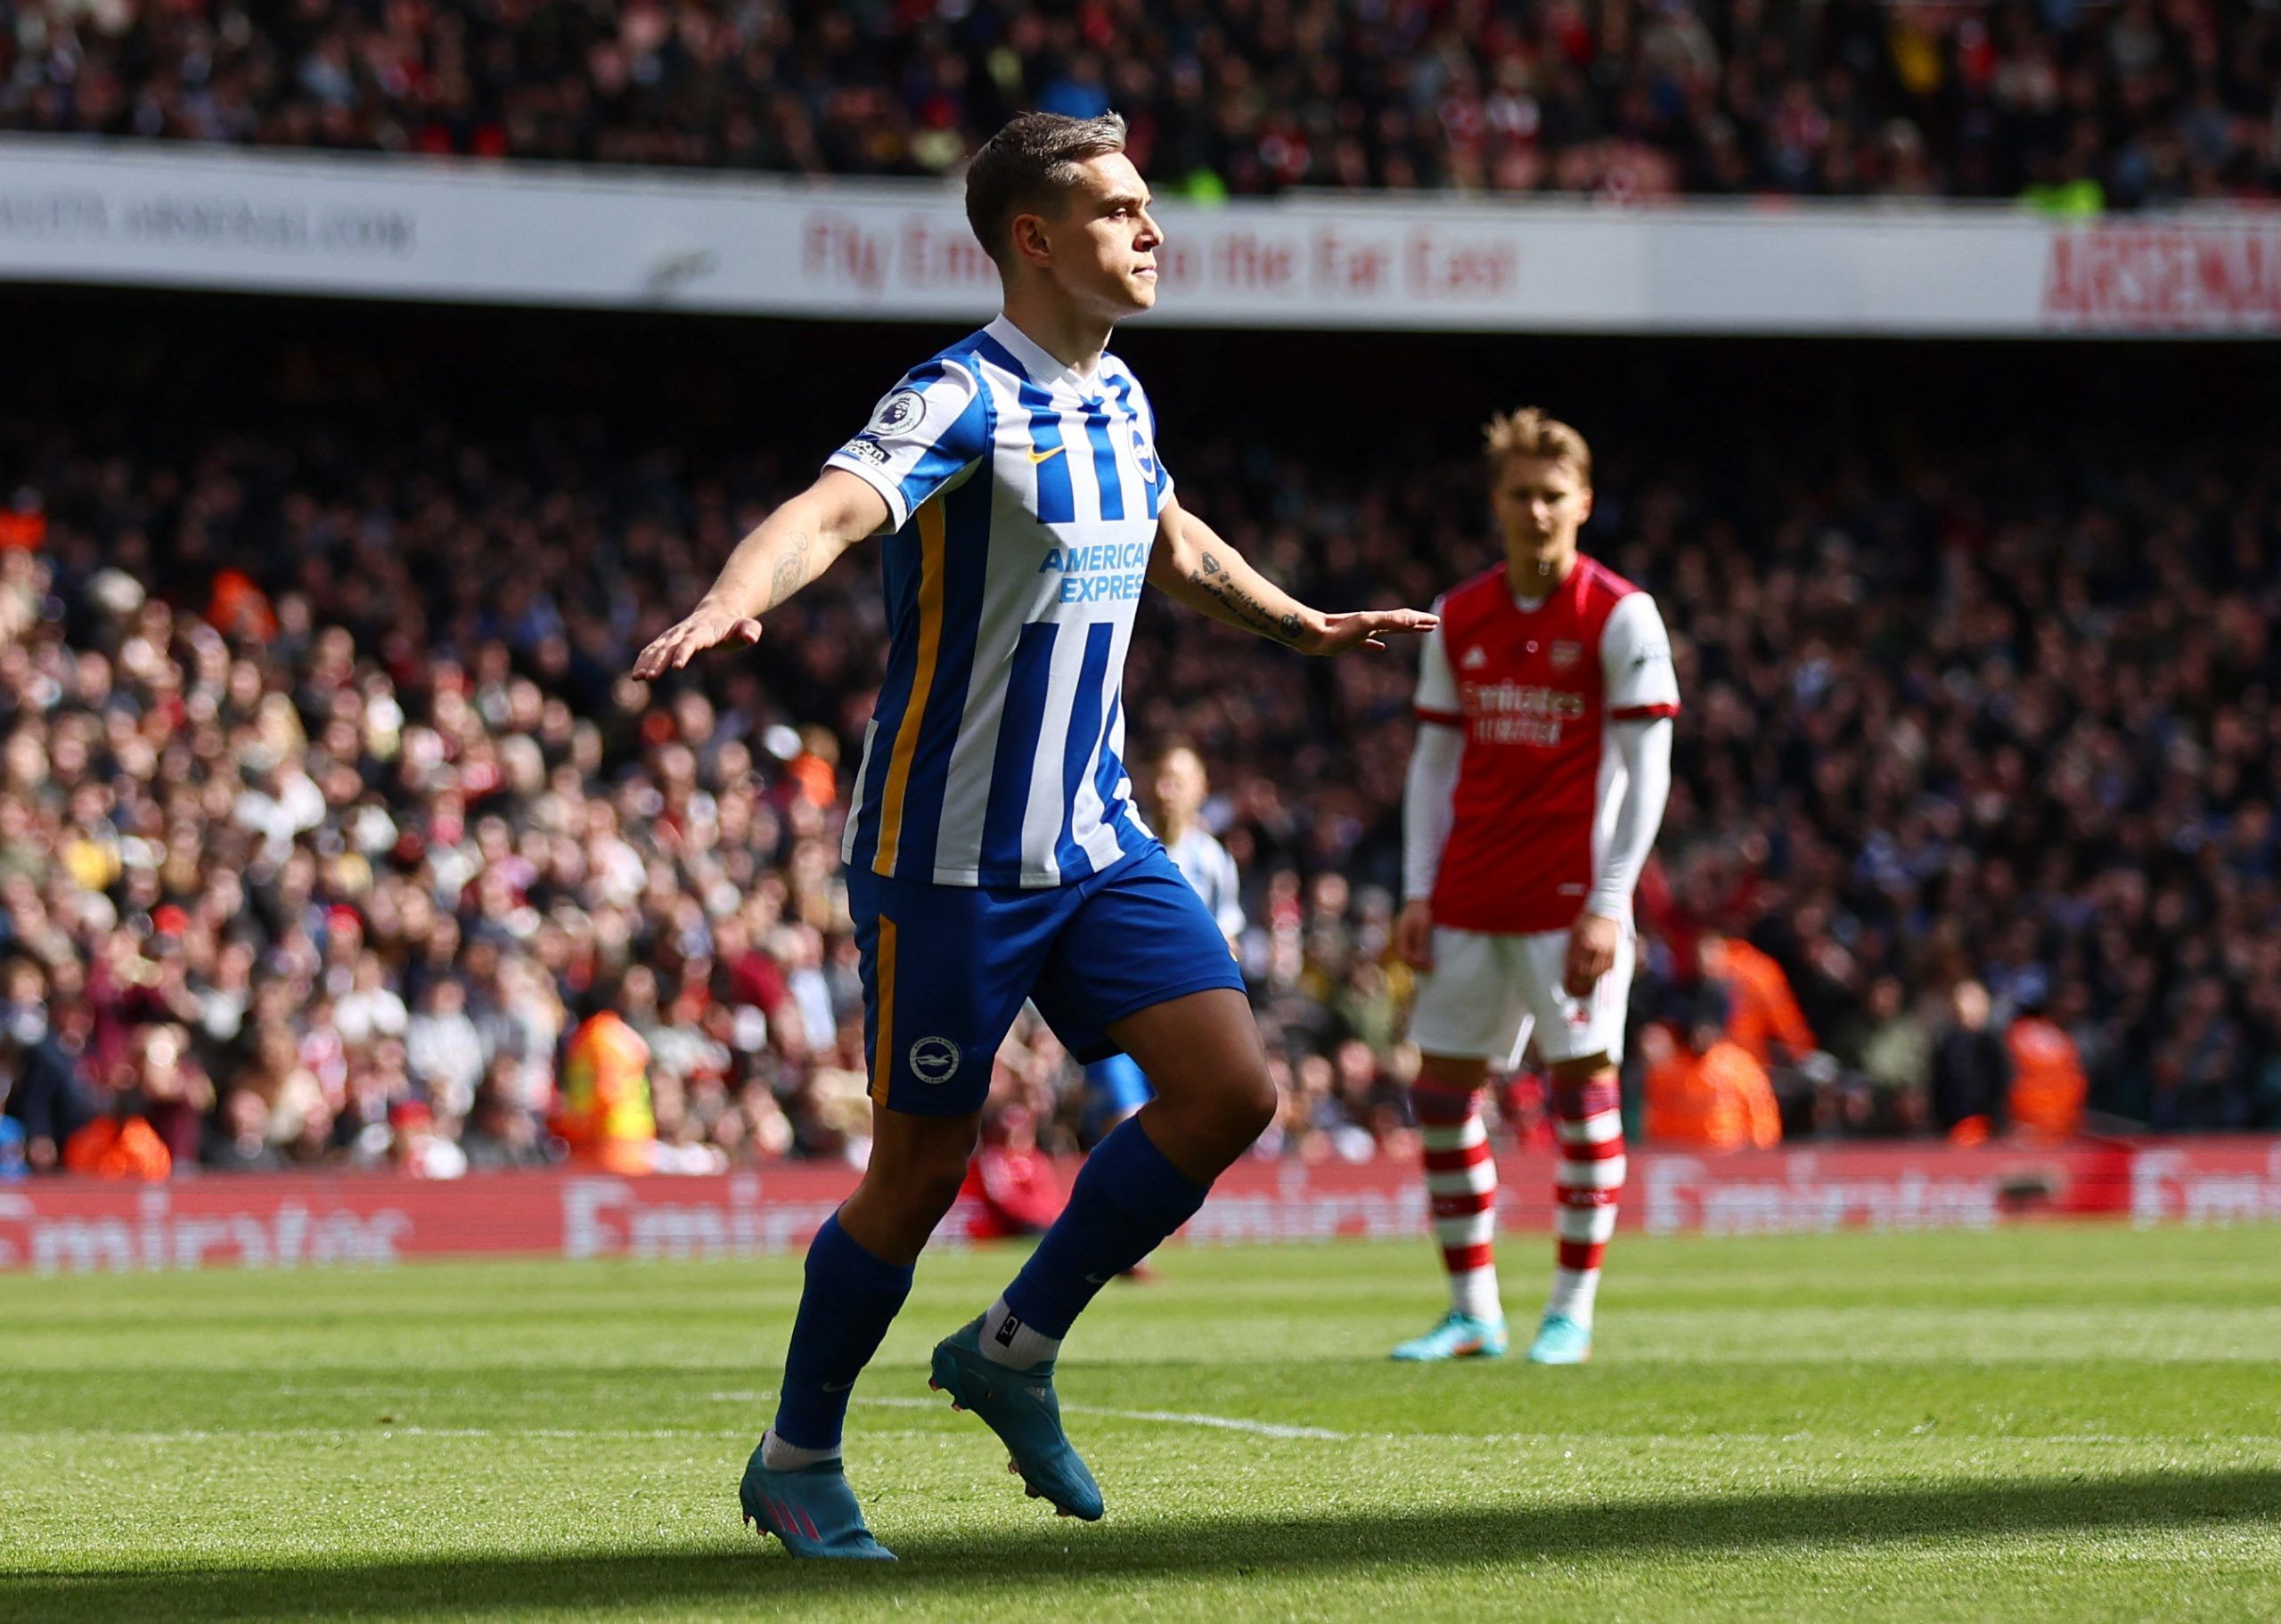 Soccer Football - Premier League - Arsenal v Brighton &amp; Hove Albion - Emirates Stadium, London, Britain - April 9, 2022 Brighton &amp; Hove Albion's Leandro Trossard celebrates scoring their first goal REUTERS/David Klein EDITORIAL USE ONLY. No use with unauthorized audio, video, data, fixture lists, club/league logos or 'live' services. Online in-match use limited to 75 images, no video emulation. No use in betting, games or single club /league/player publications.  Please contact your acco